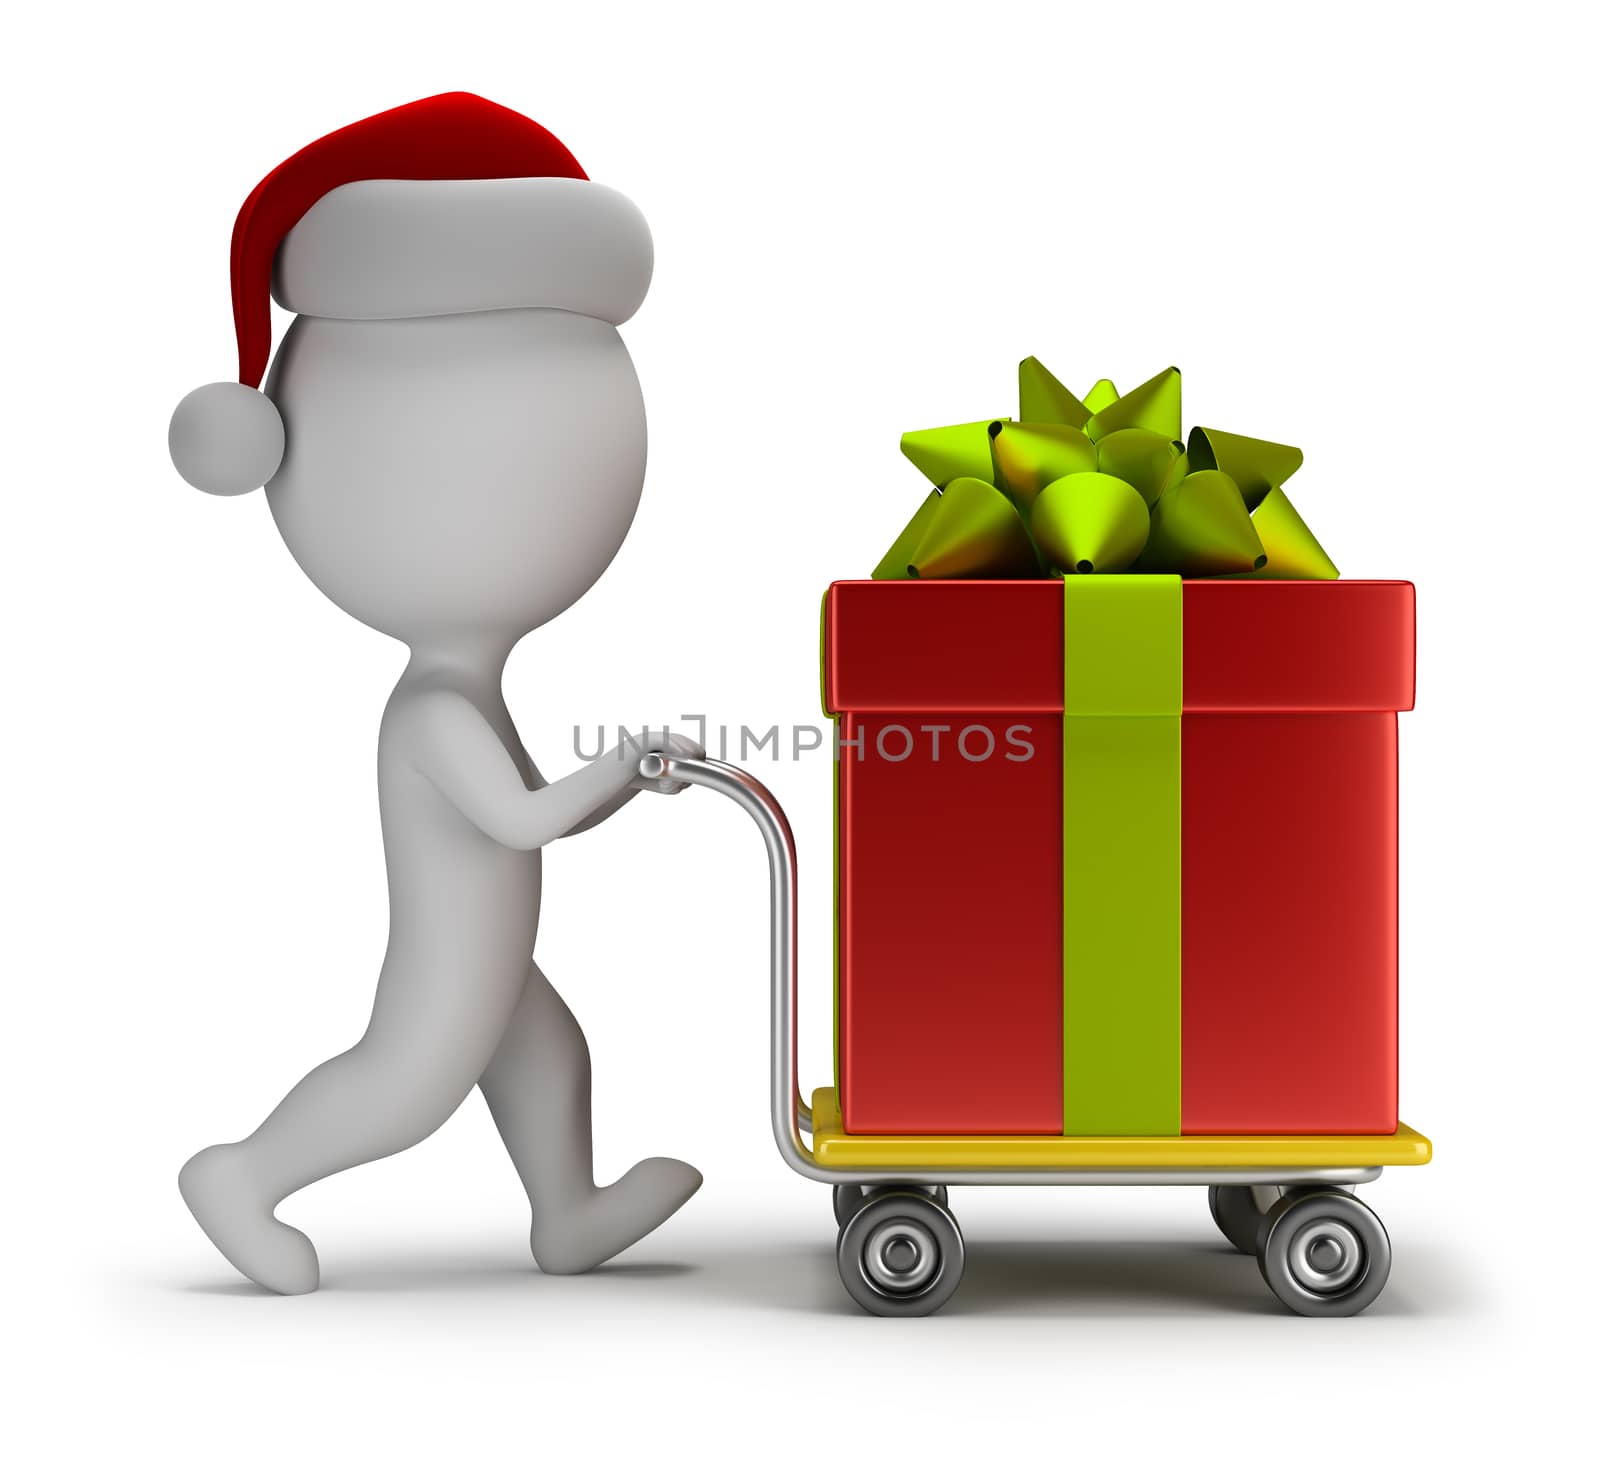 3d small person - Santa carries a big gift on trolley. 3d image. White background.